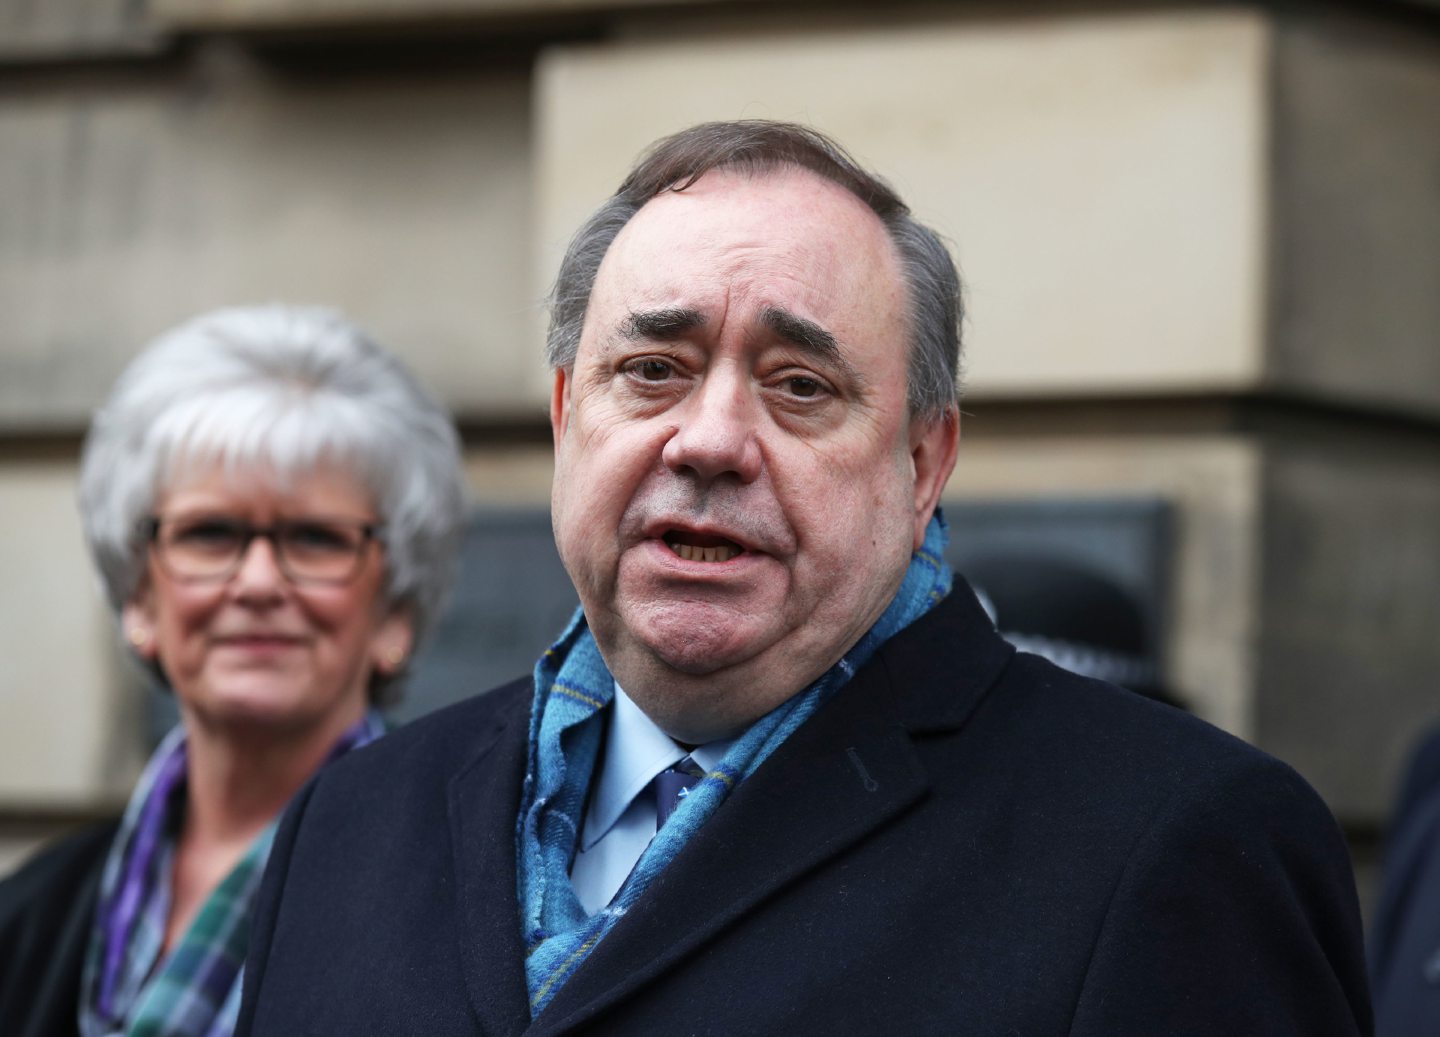 Alex Salmond speaks outside the High Court in Edinburgh after he was cleared of attempted rape and a series of sexual assaults.